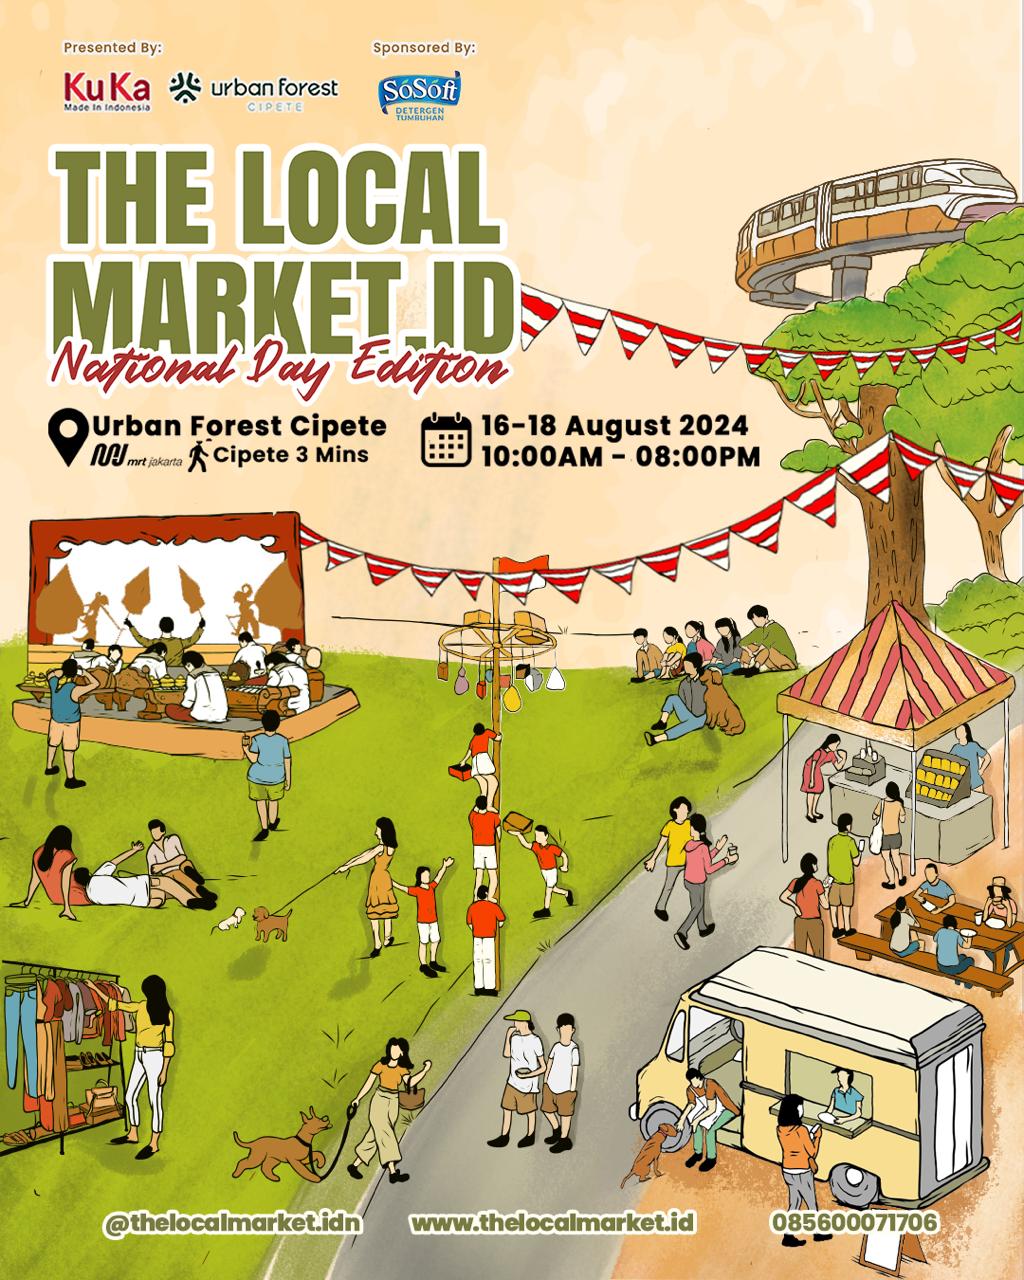 The Local Market - National Day Edition